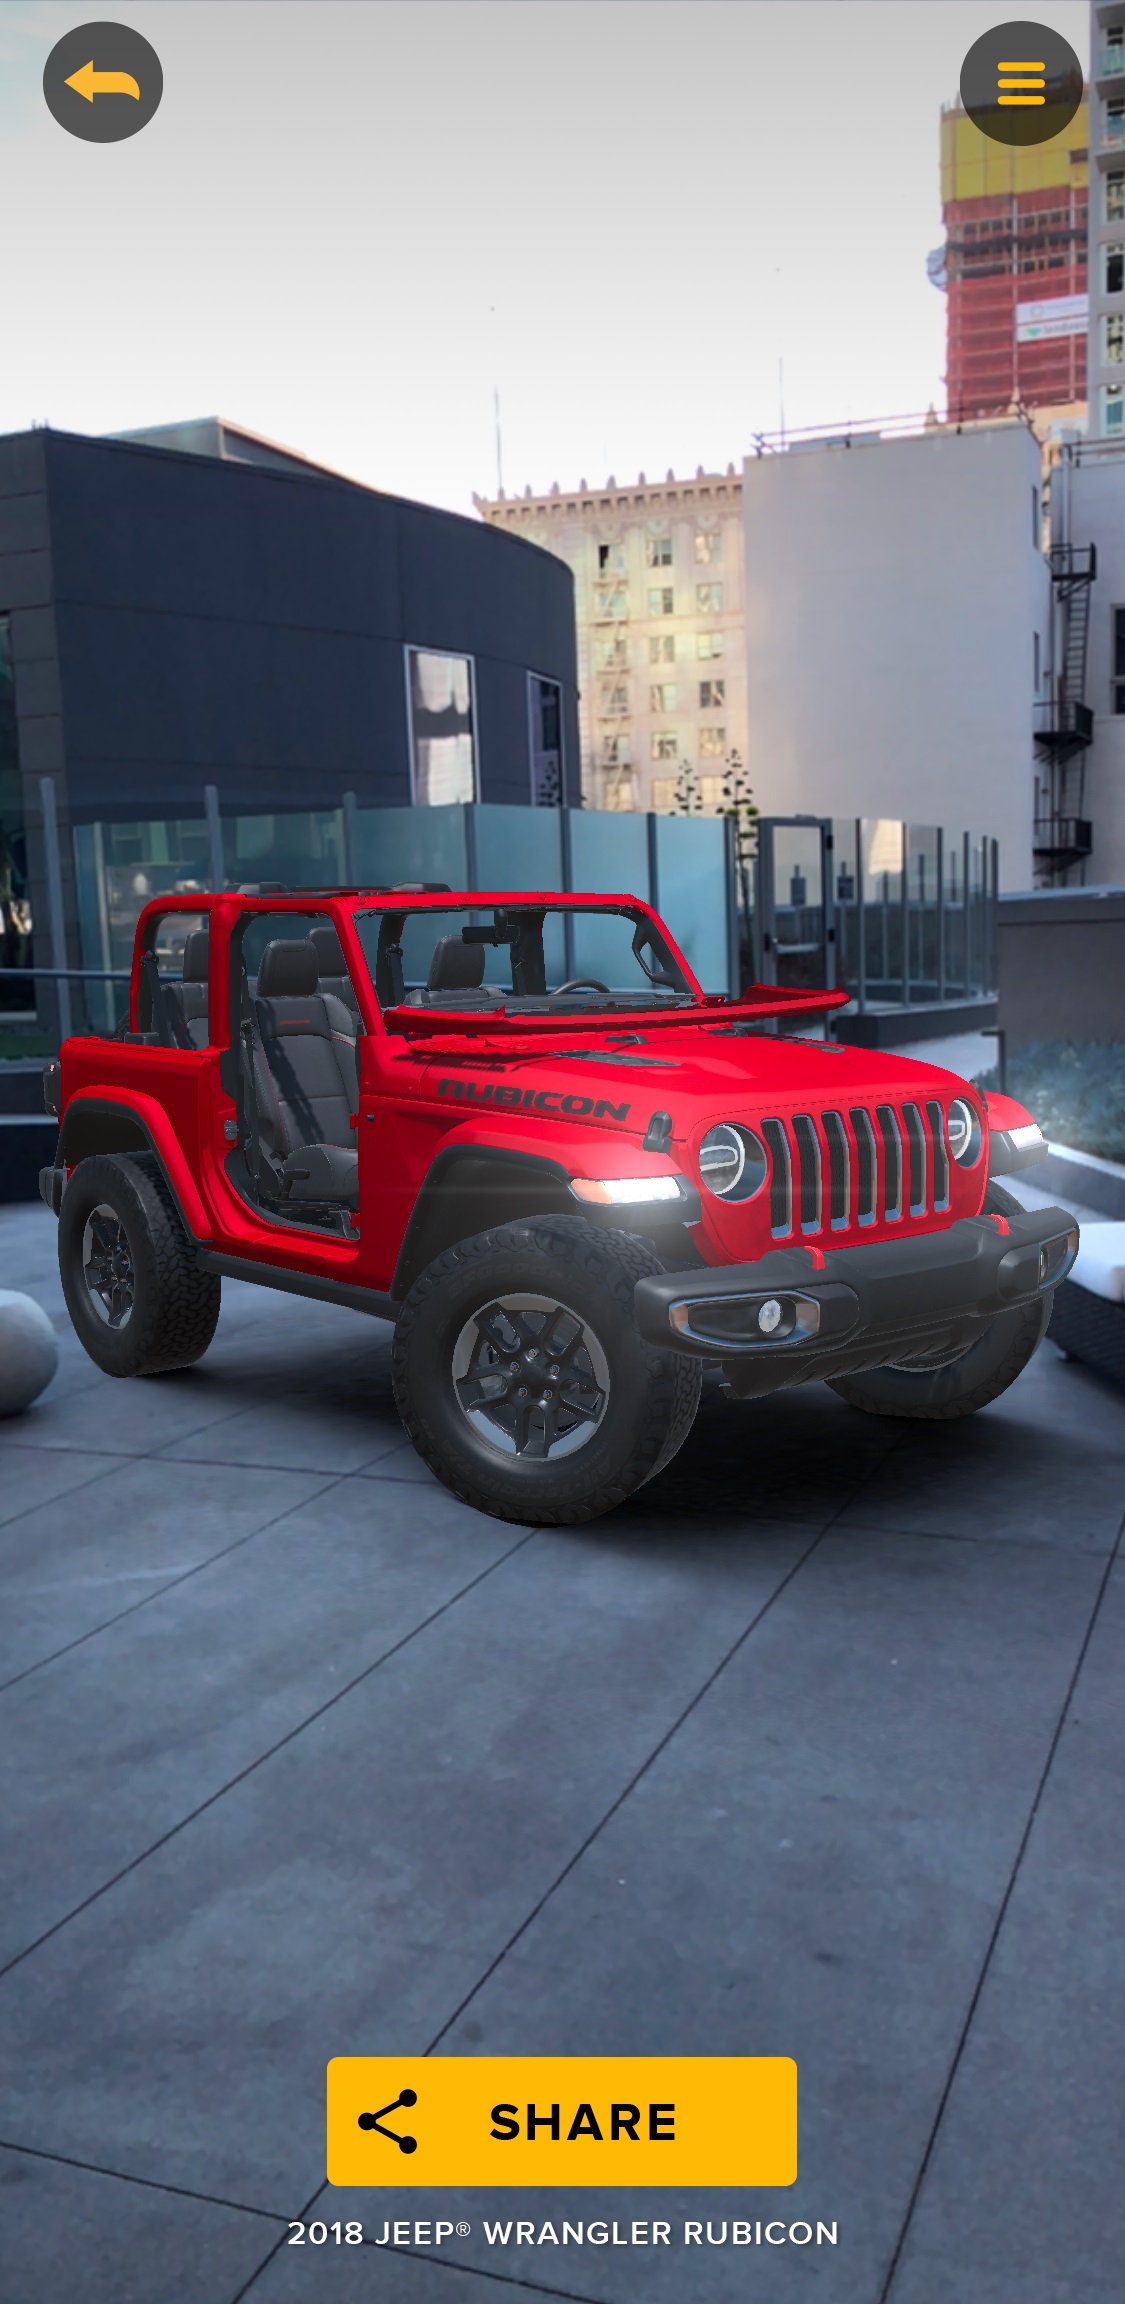 The Adventure Reality by Jeep® app allows users to visualize a Jeep Wrangler  in a variety of locations. | Stellantis Blog